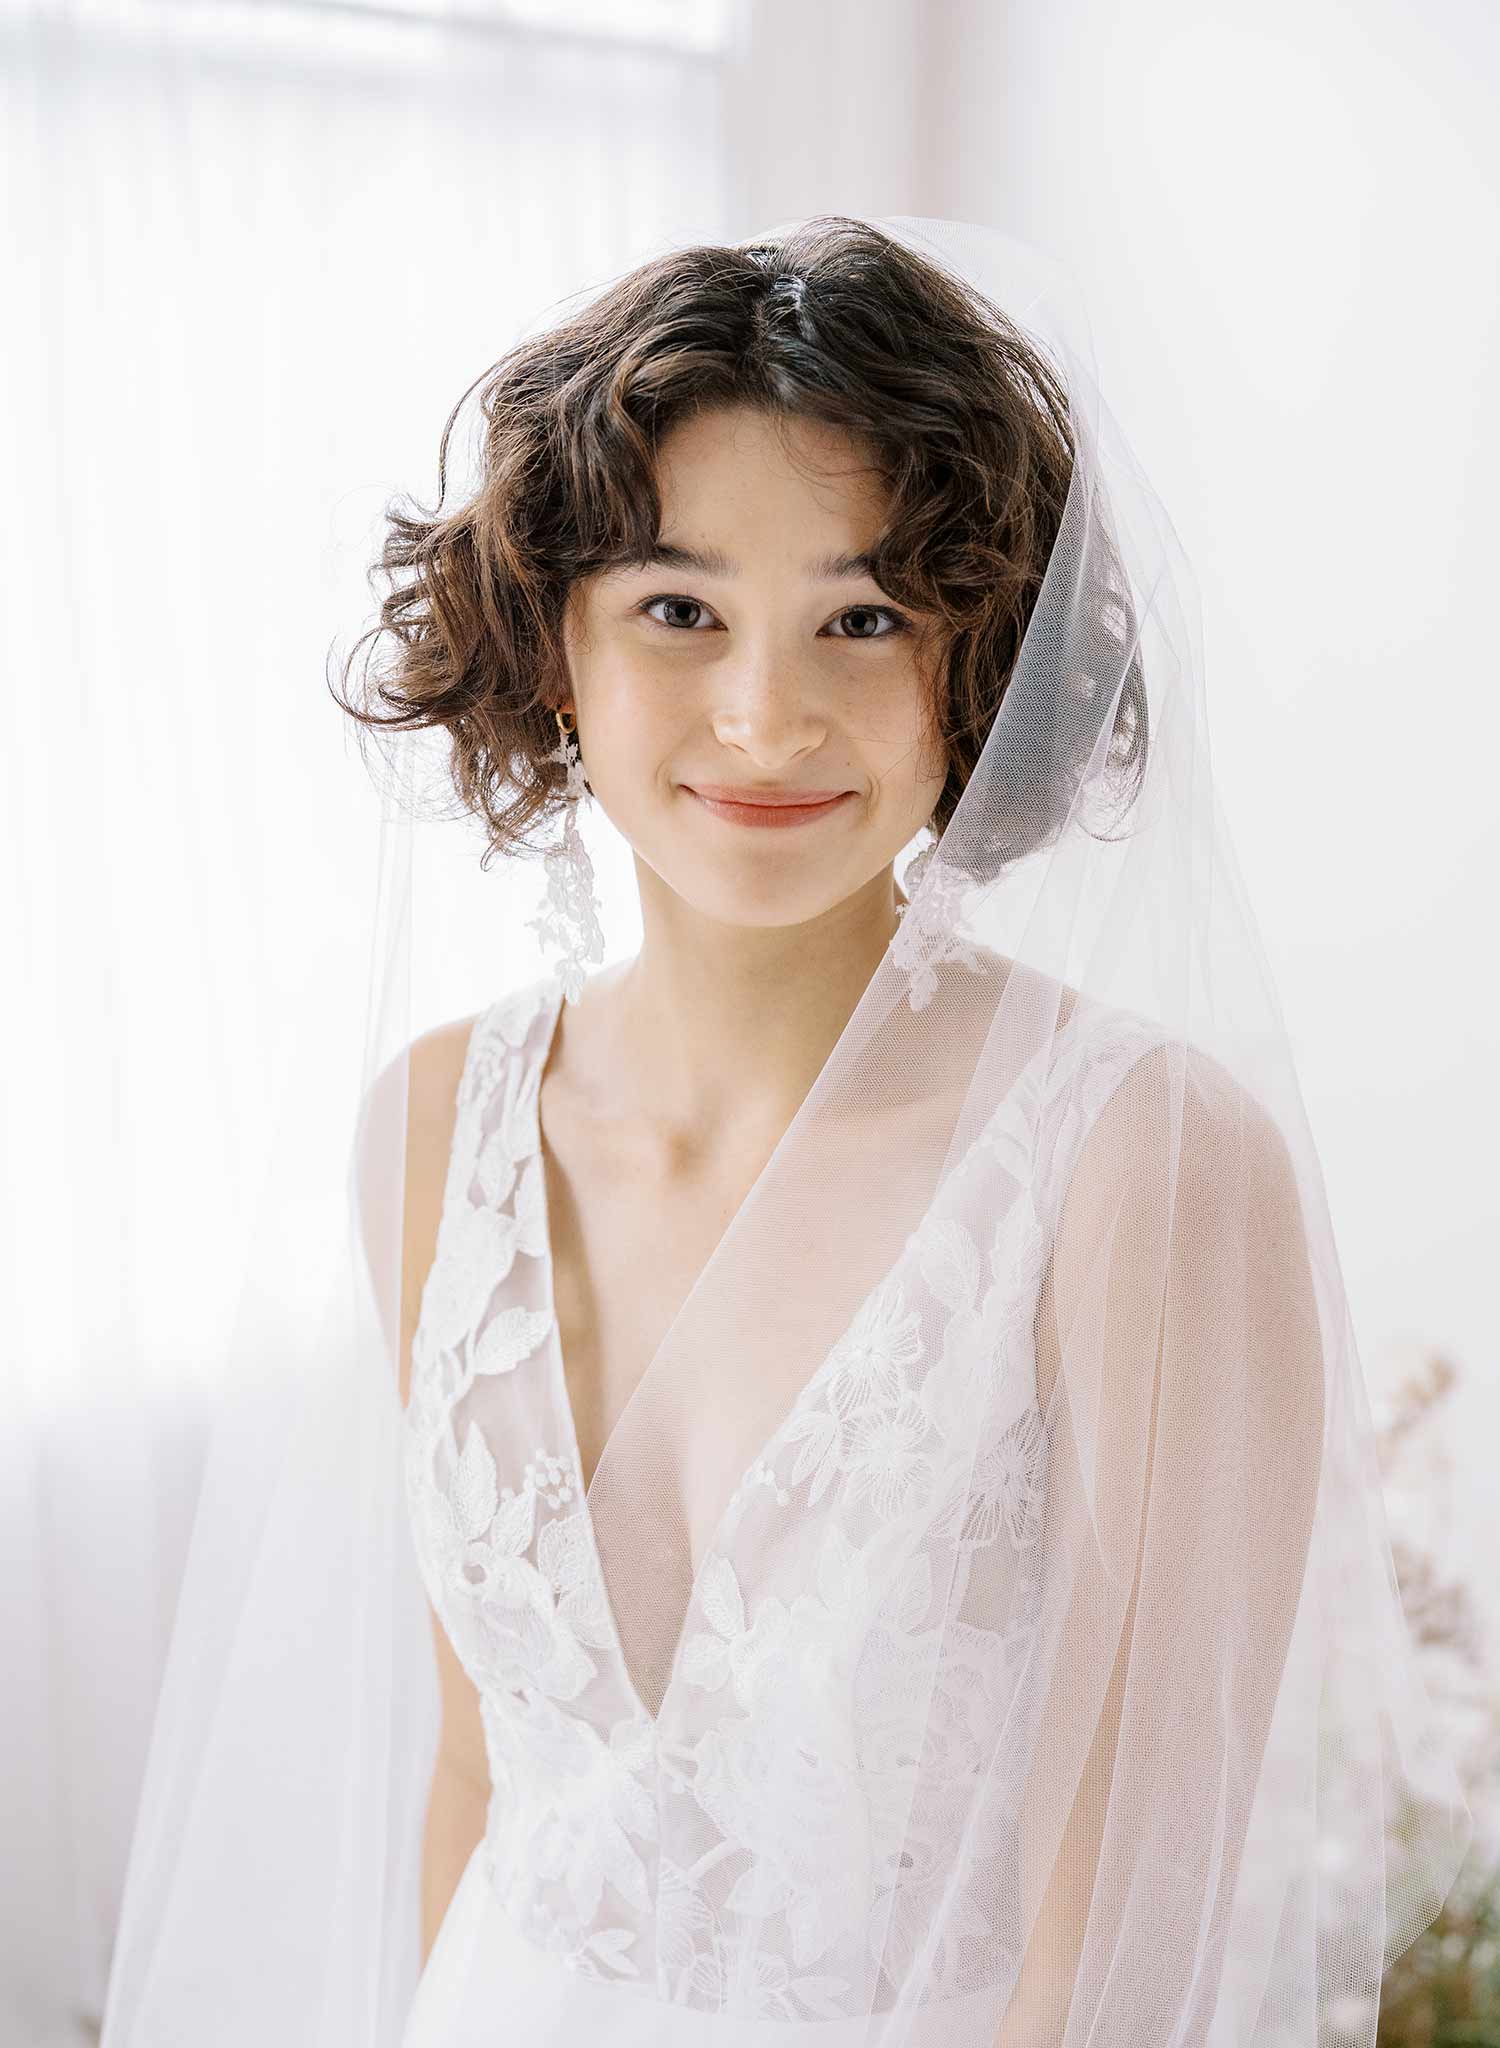 Twigs & Honey Bridal Cathedral Veil with Organza Trim - Organza Edge Veil with Blusher, Chapel Length - Style #2360 Chapel (90)